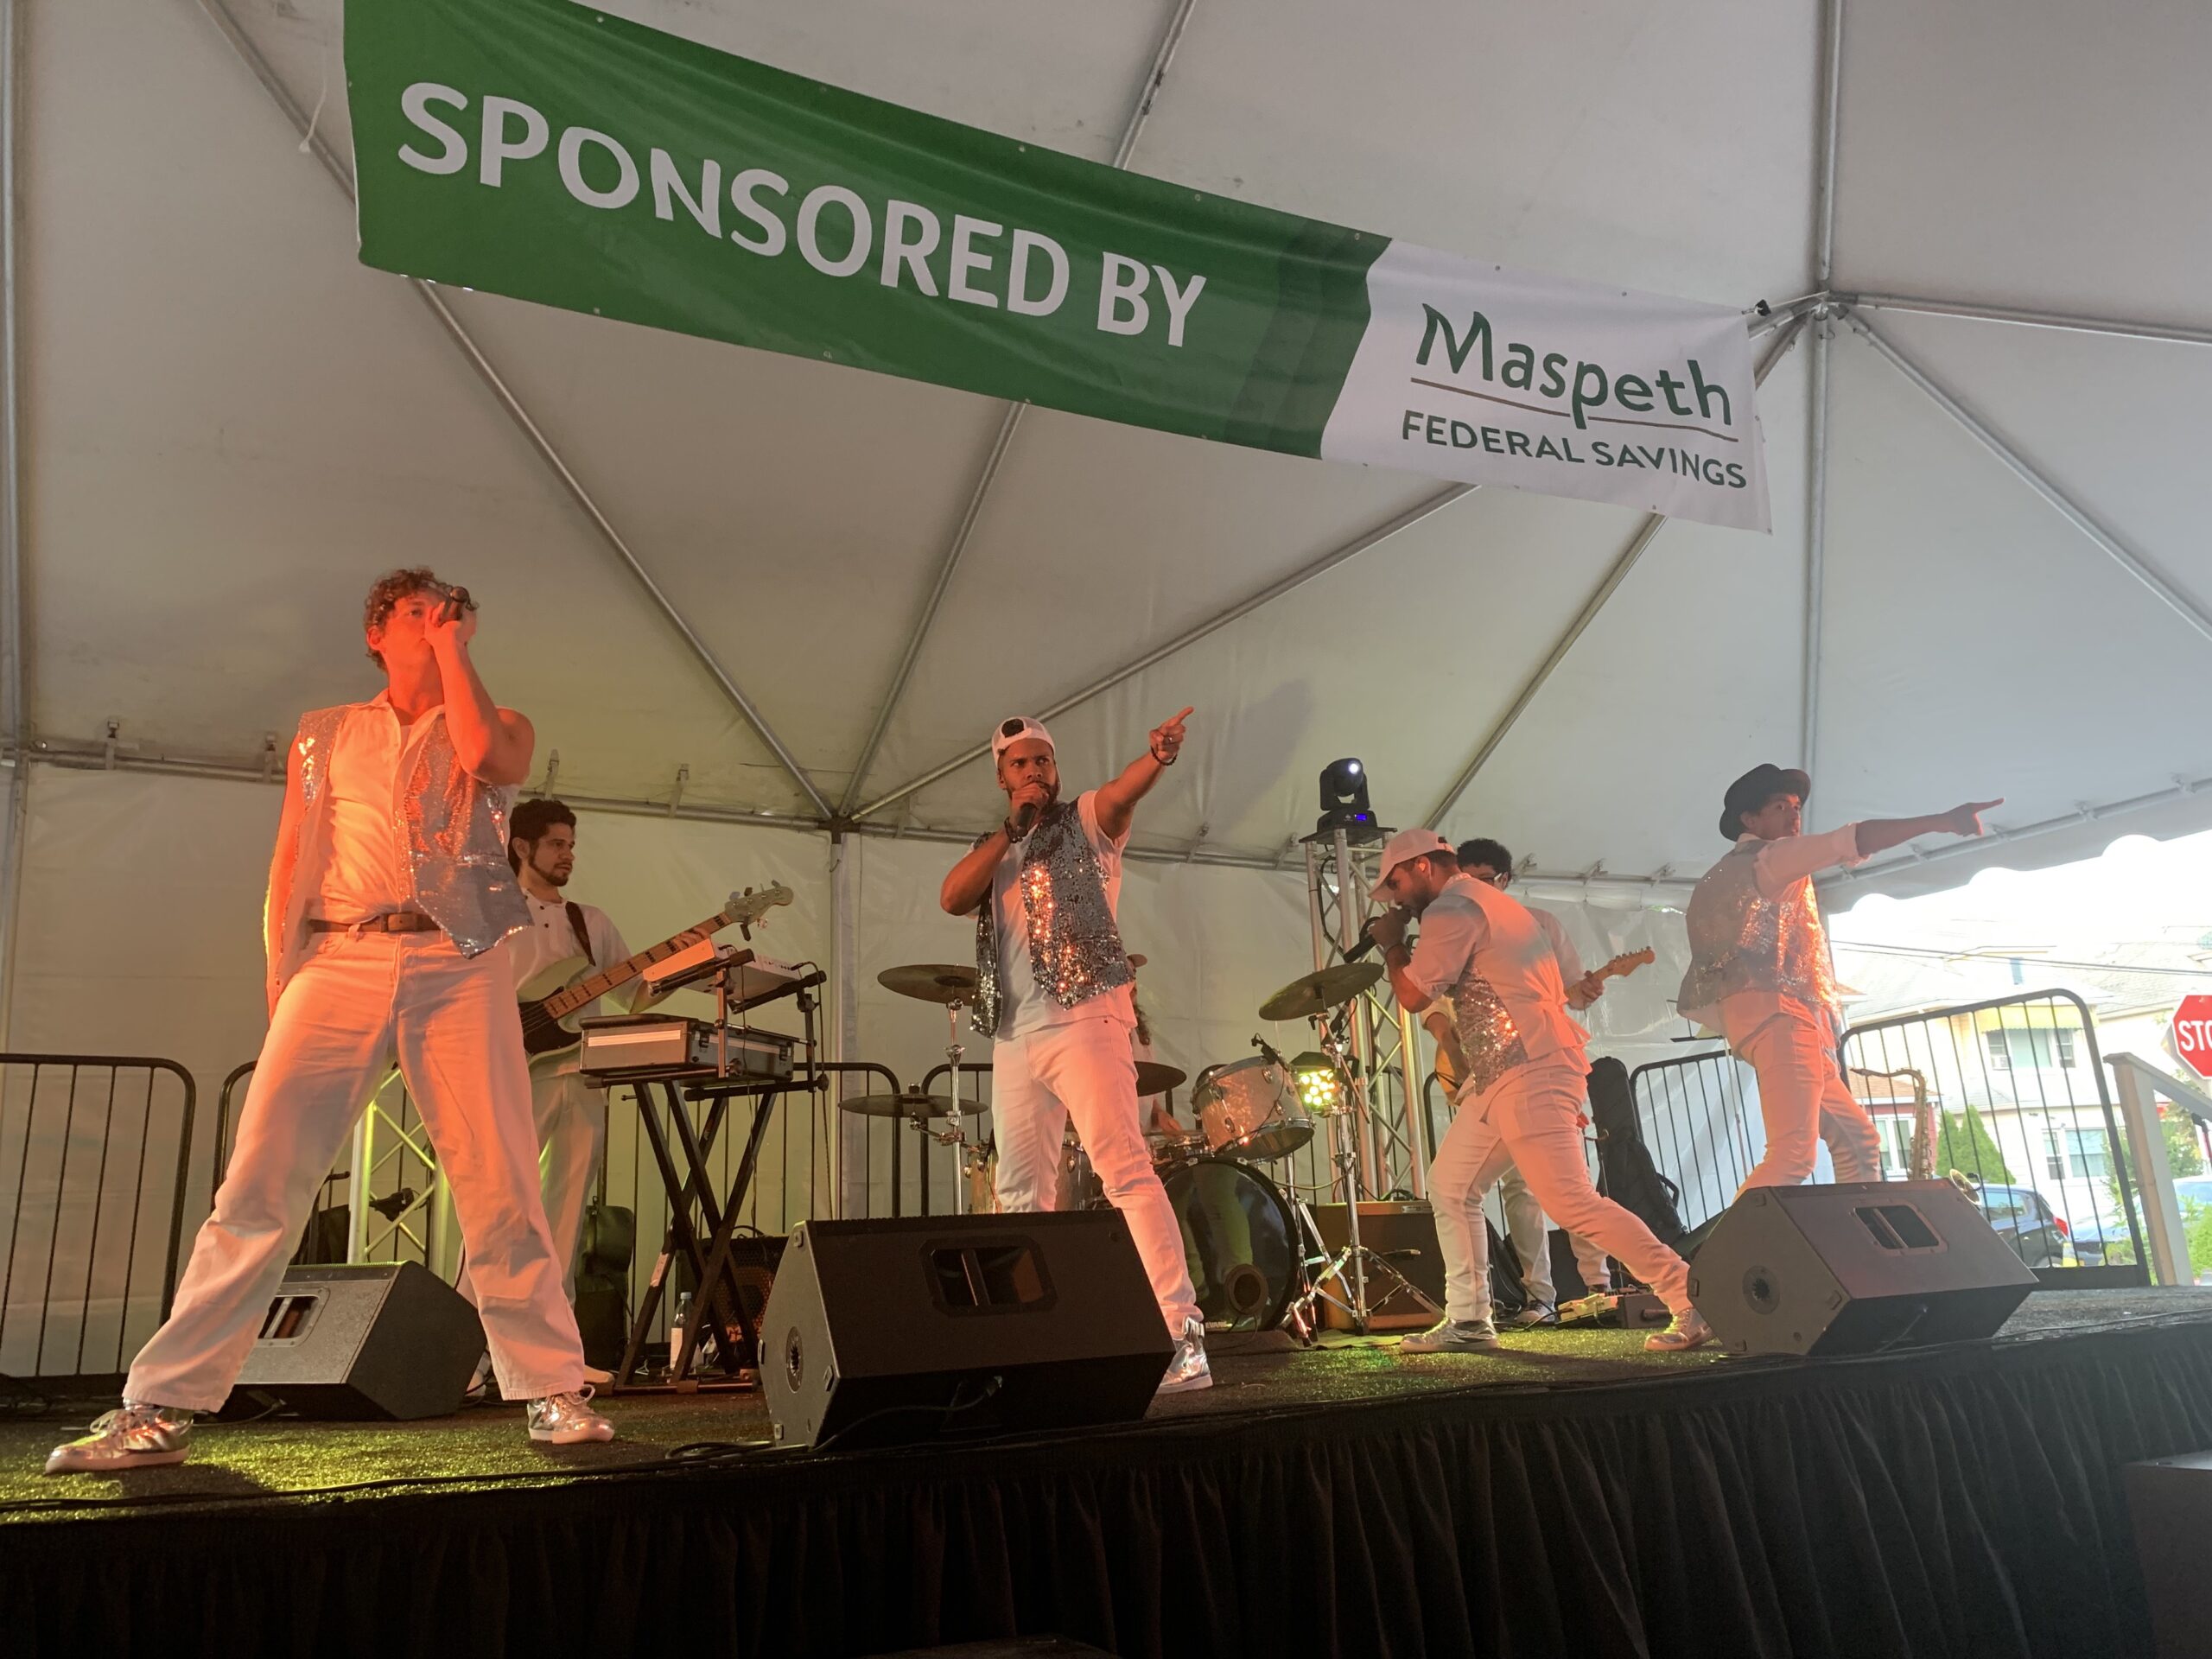 Four band members wearing white pants and sparkly silver vests over white shirts sing and dance on a black stage. They are under a white tent, and a warm orange light shines on them. A white and green sign above them reads "SPONSORED BY MASPETH FEDERAL SAVINGS."